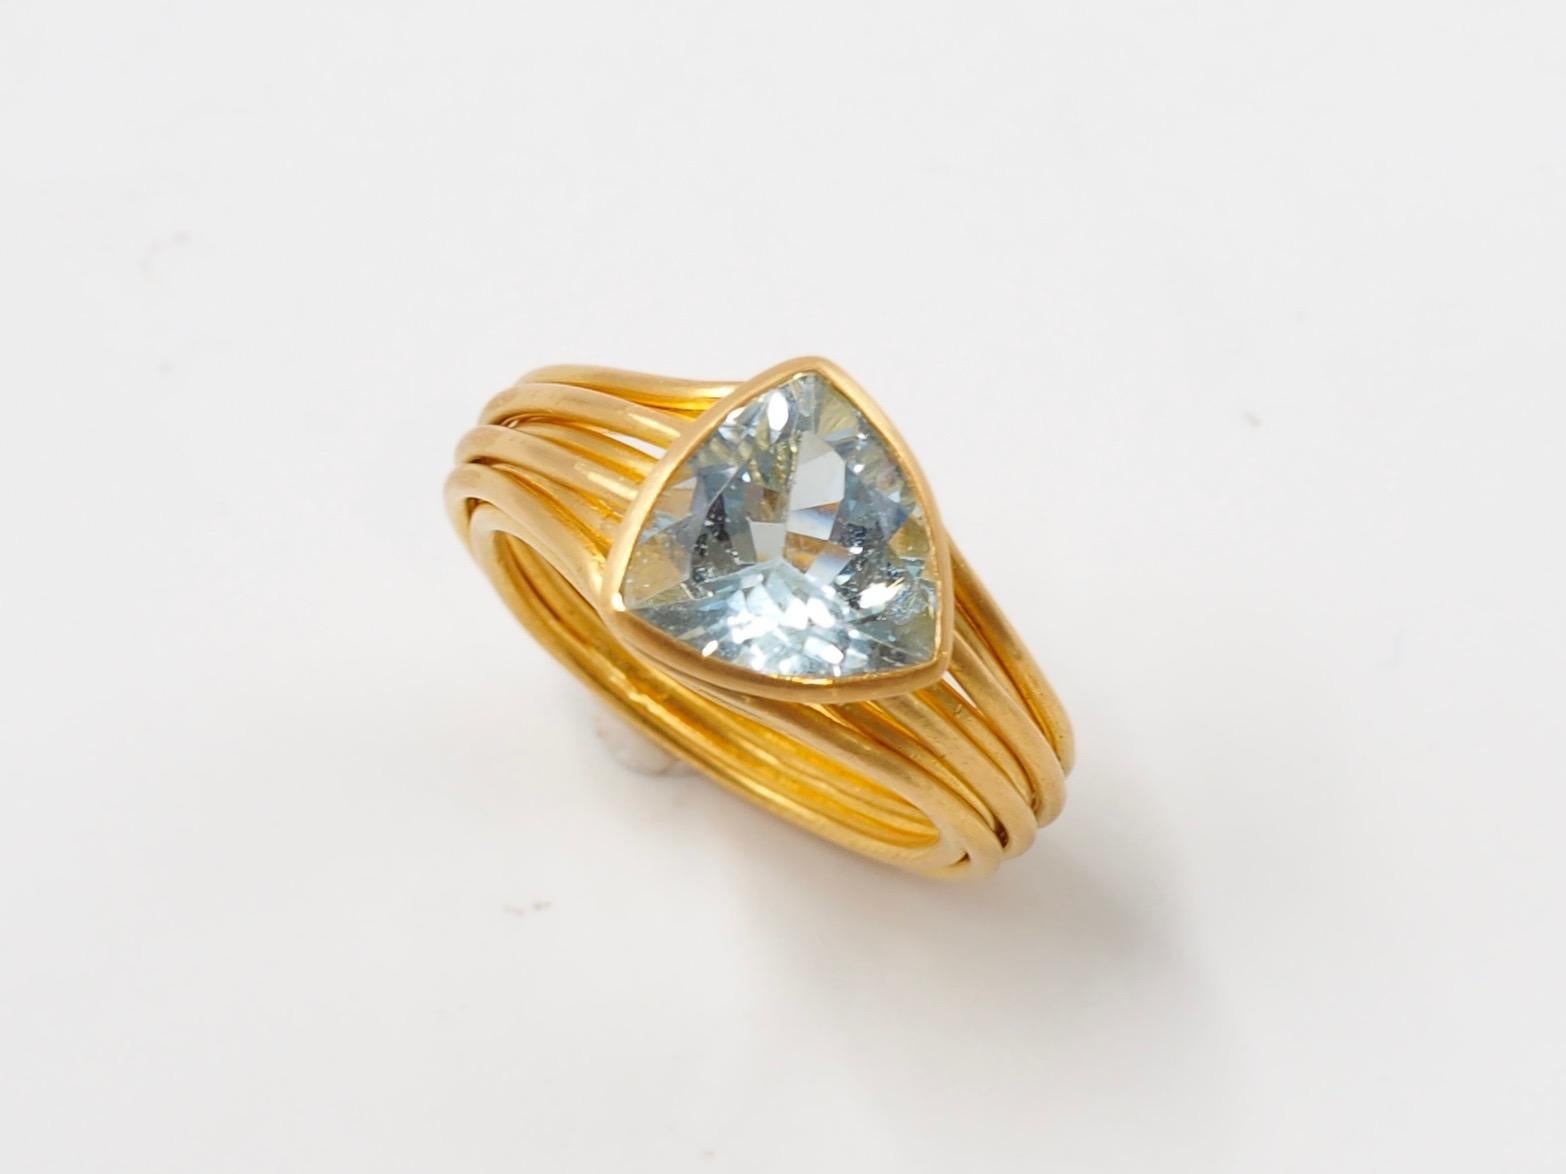 This ring by Scrives is made of ten 22 karat gold wires of 1mm thickness running around an aquamarine of 5.2 carats in a shape of a trillion. 

The stone shows minor and non visible natural and typical inclusions (no treatment).
 
This one-of-a-kind